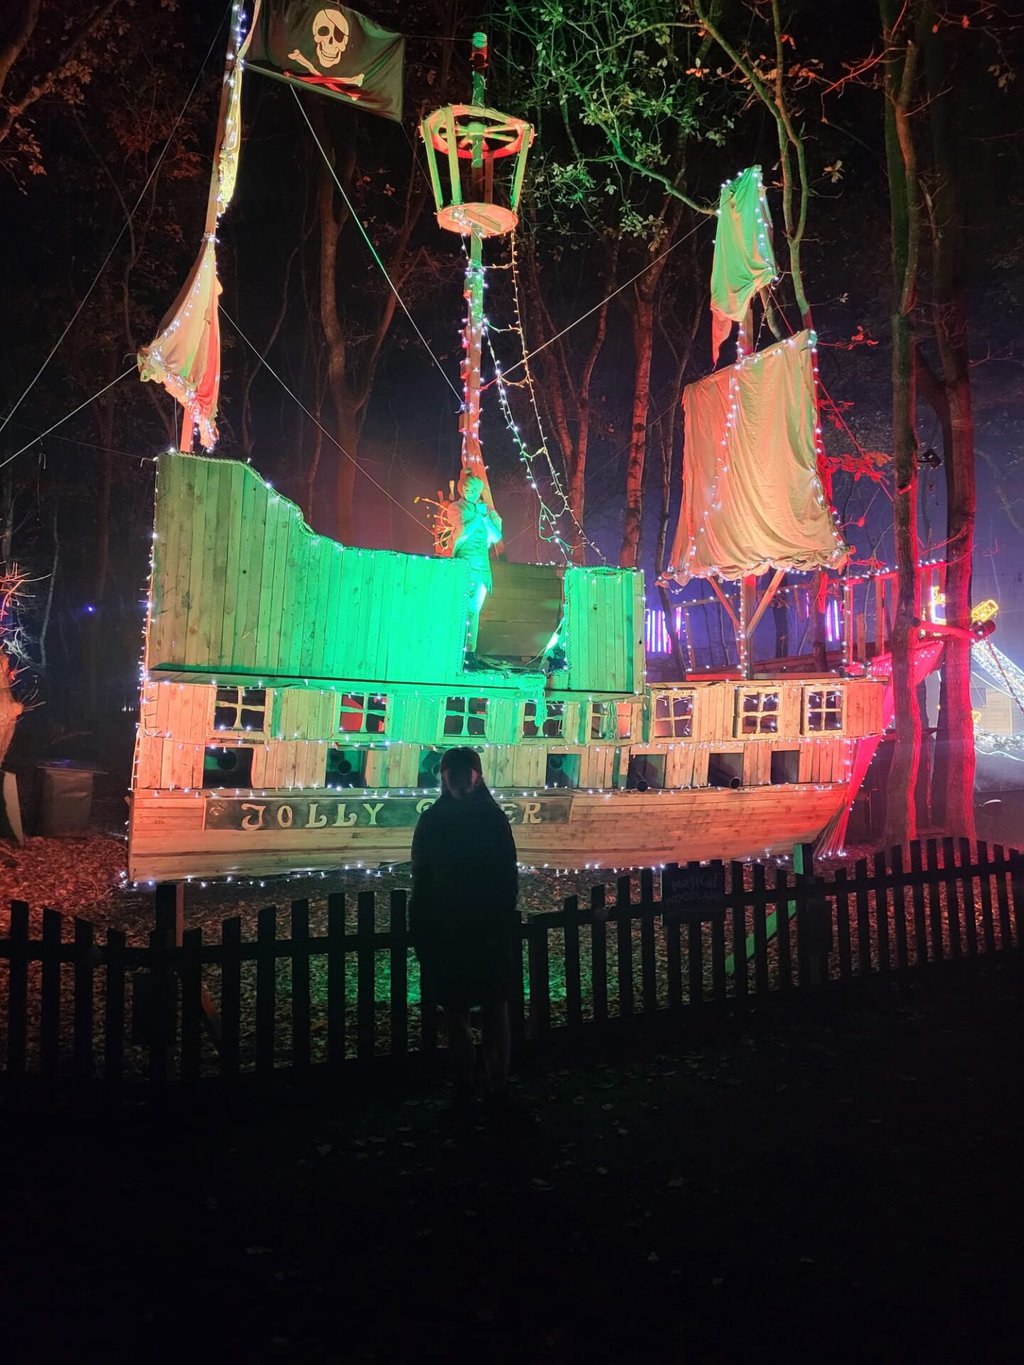 Magical Woodland at Blakemere Village in Cheshire | Review